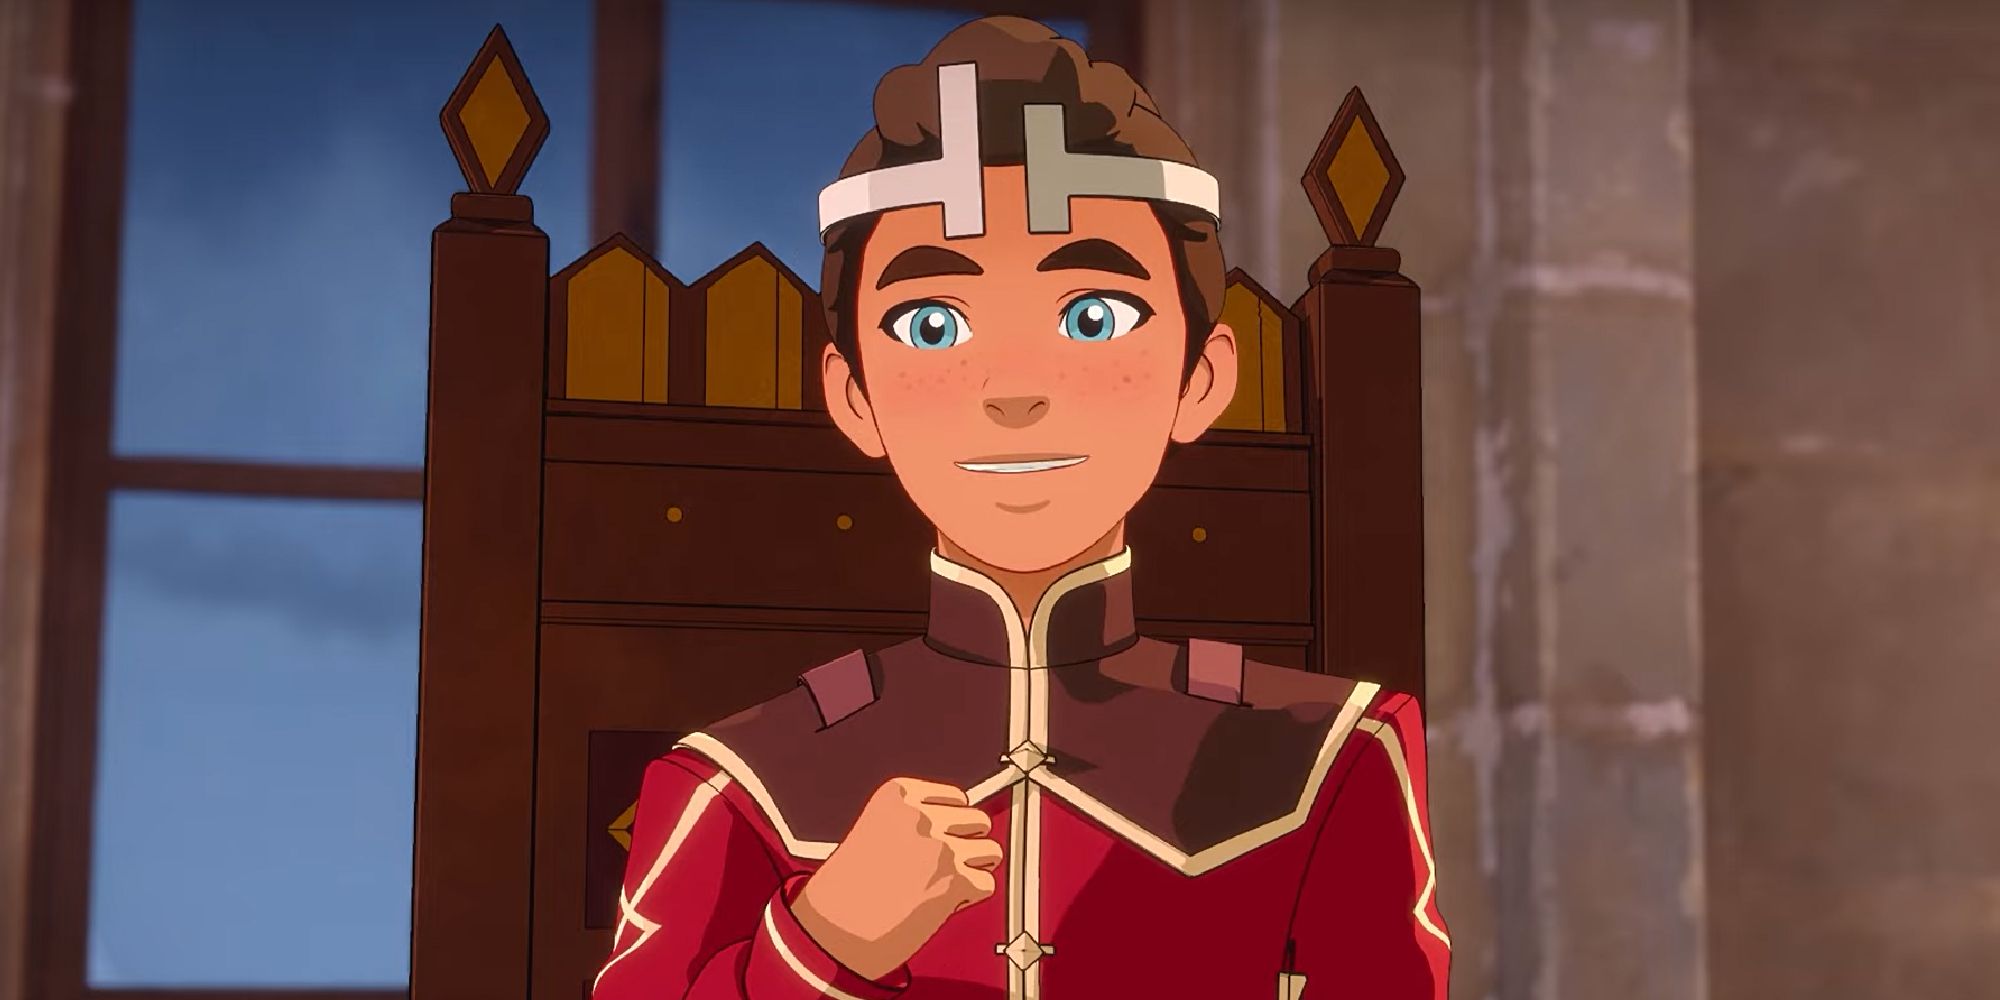 Dragon Prince Season 4 Episode 1 Released Online Early For Free